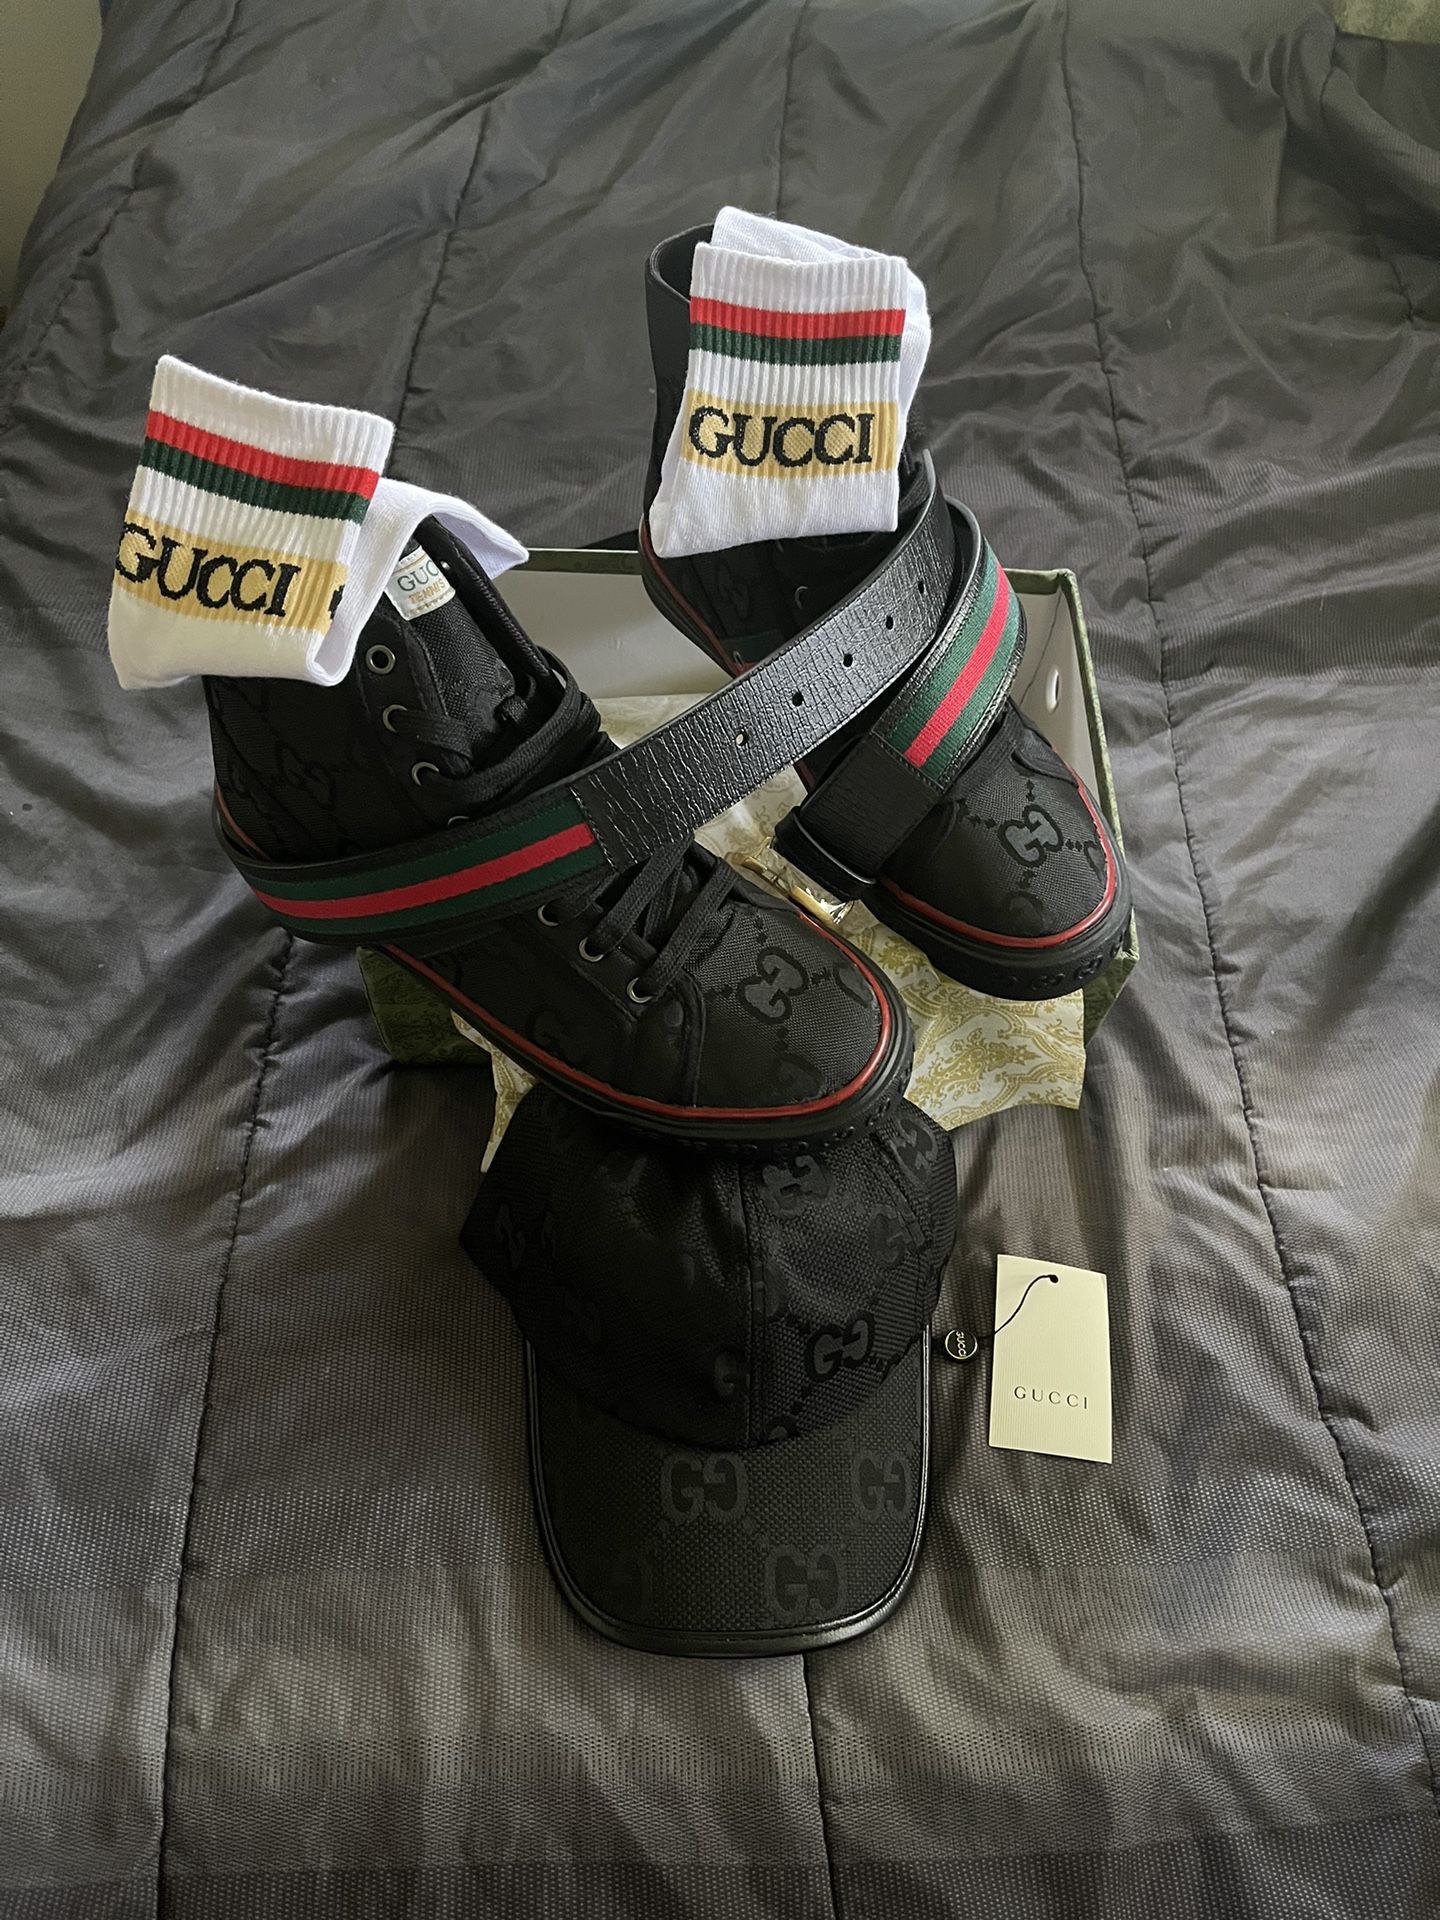 Gucci Item For Sale 